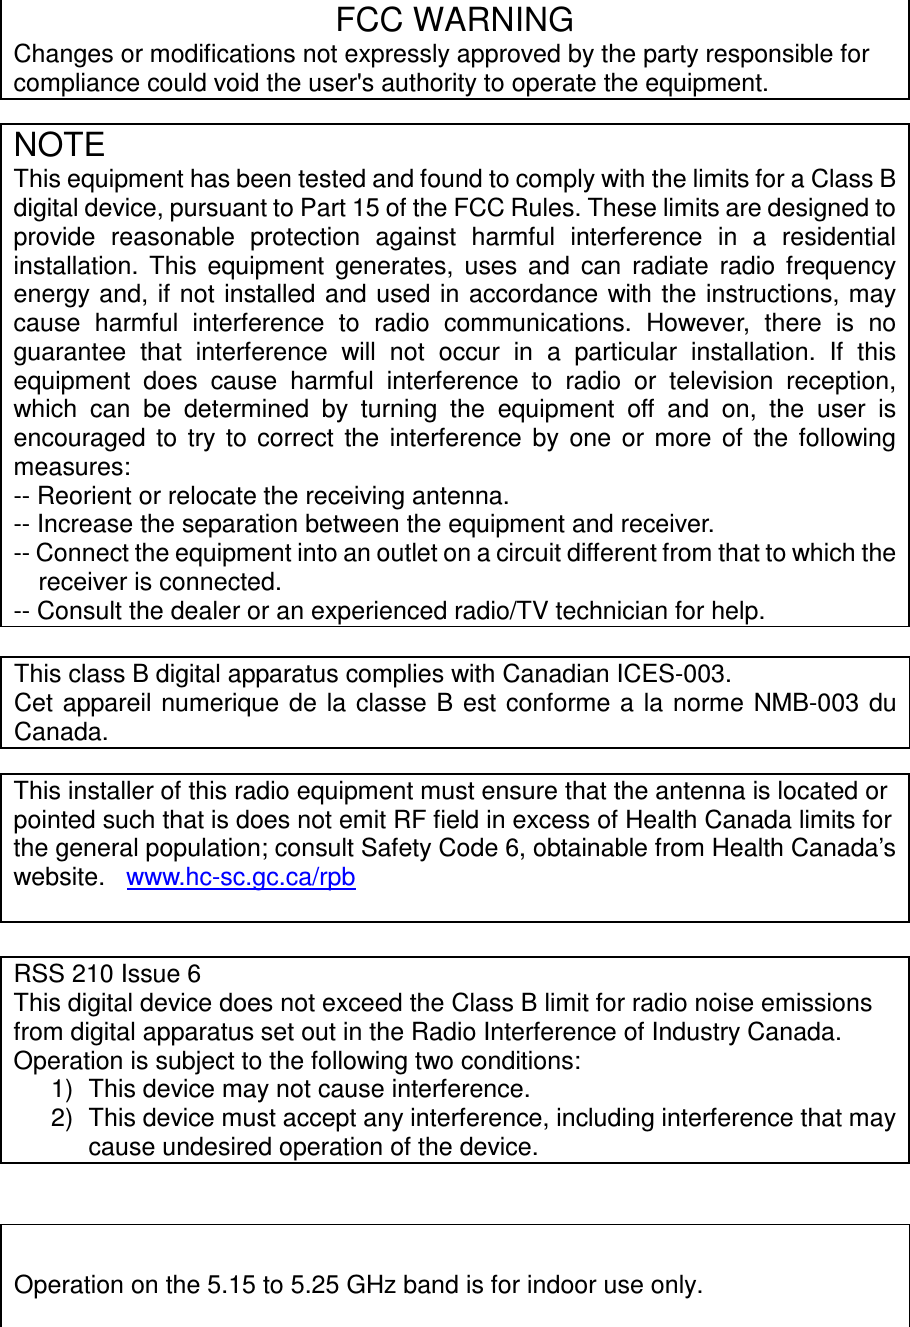 - 10 -                FCC WARNING Changes or modifications not expressly approved by the party responsible for compliance could void the user&apos;s authority to operate the equipment. This class B digital apparatus complies with Canadian ICES-003. Cet appareil numerique  de  la  classe B est conforme a la norme NMB-003  du Canada.    NOTE This equipment has been tested and found to comply with the limits for a Class B digital device, pursuant to Part 15 of the FCC Rules. These limits are designed to provide  reasonable  protection  against  harmful  interference  in  a  residential installation.  This  equipment  generates,  uses  and  can  radiate  radio  frequency energy and, if not installed and used in accordance with the  instructions, may cause  harmful  interference  to  radio  communications.  However,  there  is  no guarantee  that  interference  will  not  occur  in  a  particular  installation.  If  this equipment  does  cause  harmful  interference  to  radio  or  television  reception, which  can  be  determined  by  turning  the  equipment  off  and  on,  the  user  is encouraged  to  try  to  correct  the  interference  by  one  or  more  of  the  following measures: -- Reorient or relocate the receiving antenna. -- Increase the separation between the equipment and receiver. -- Connect the equipment into an outlet on a circuit different from that to which the receiver is connected. -- Consult the dealer or an experienced radio/TV technician for help. This installer of this radio equipment must ensure that the antenna is located or pointed such that is does not emit RF field in excess of Health Canada limits for the general population; consult Safety Code 6, obtainable from Health Canada’s website.   www.hc-sc.gc.ca/rpb  RSS 210 Issue 6 This digital device does not exceed the Class B limit for radio noise emissions from digital apparatus set out in the Radio Interference of Industry Canada. Operation is subject to the following two conditions: 1)  This device may not cause interference.  2)  This device must accept any interference, including interference that may cause undesired operation of the device.  Operation on the 5.15 to 5.25 GHz band is for indoor use only.   